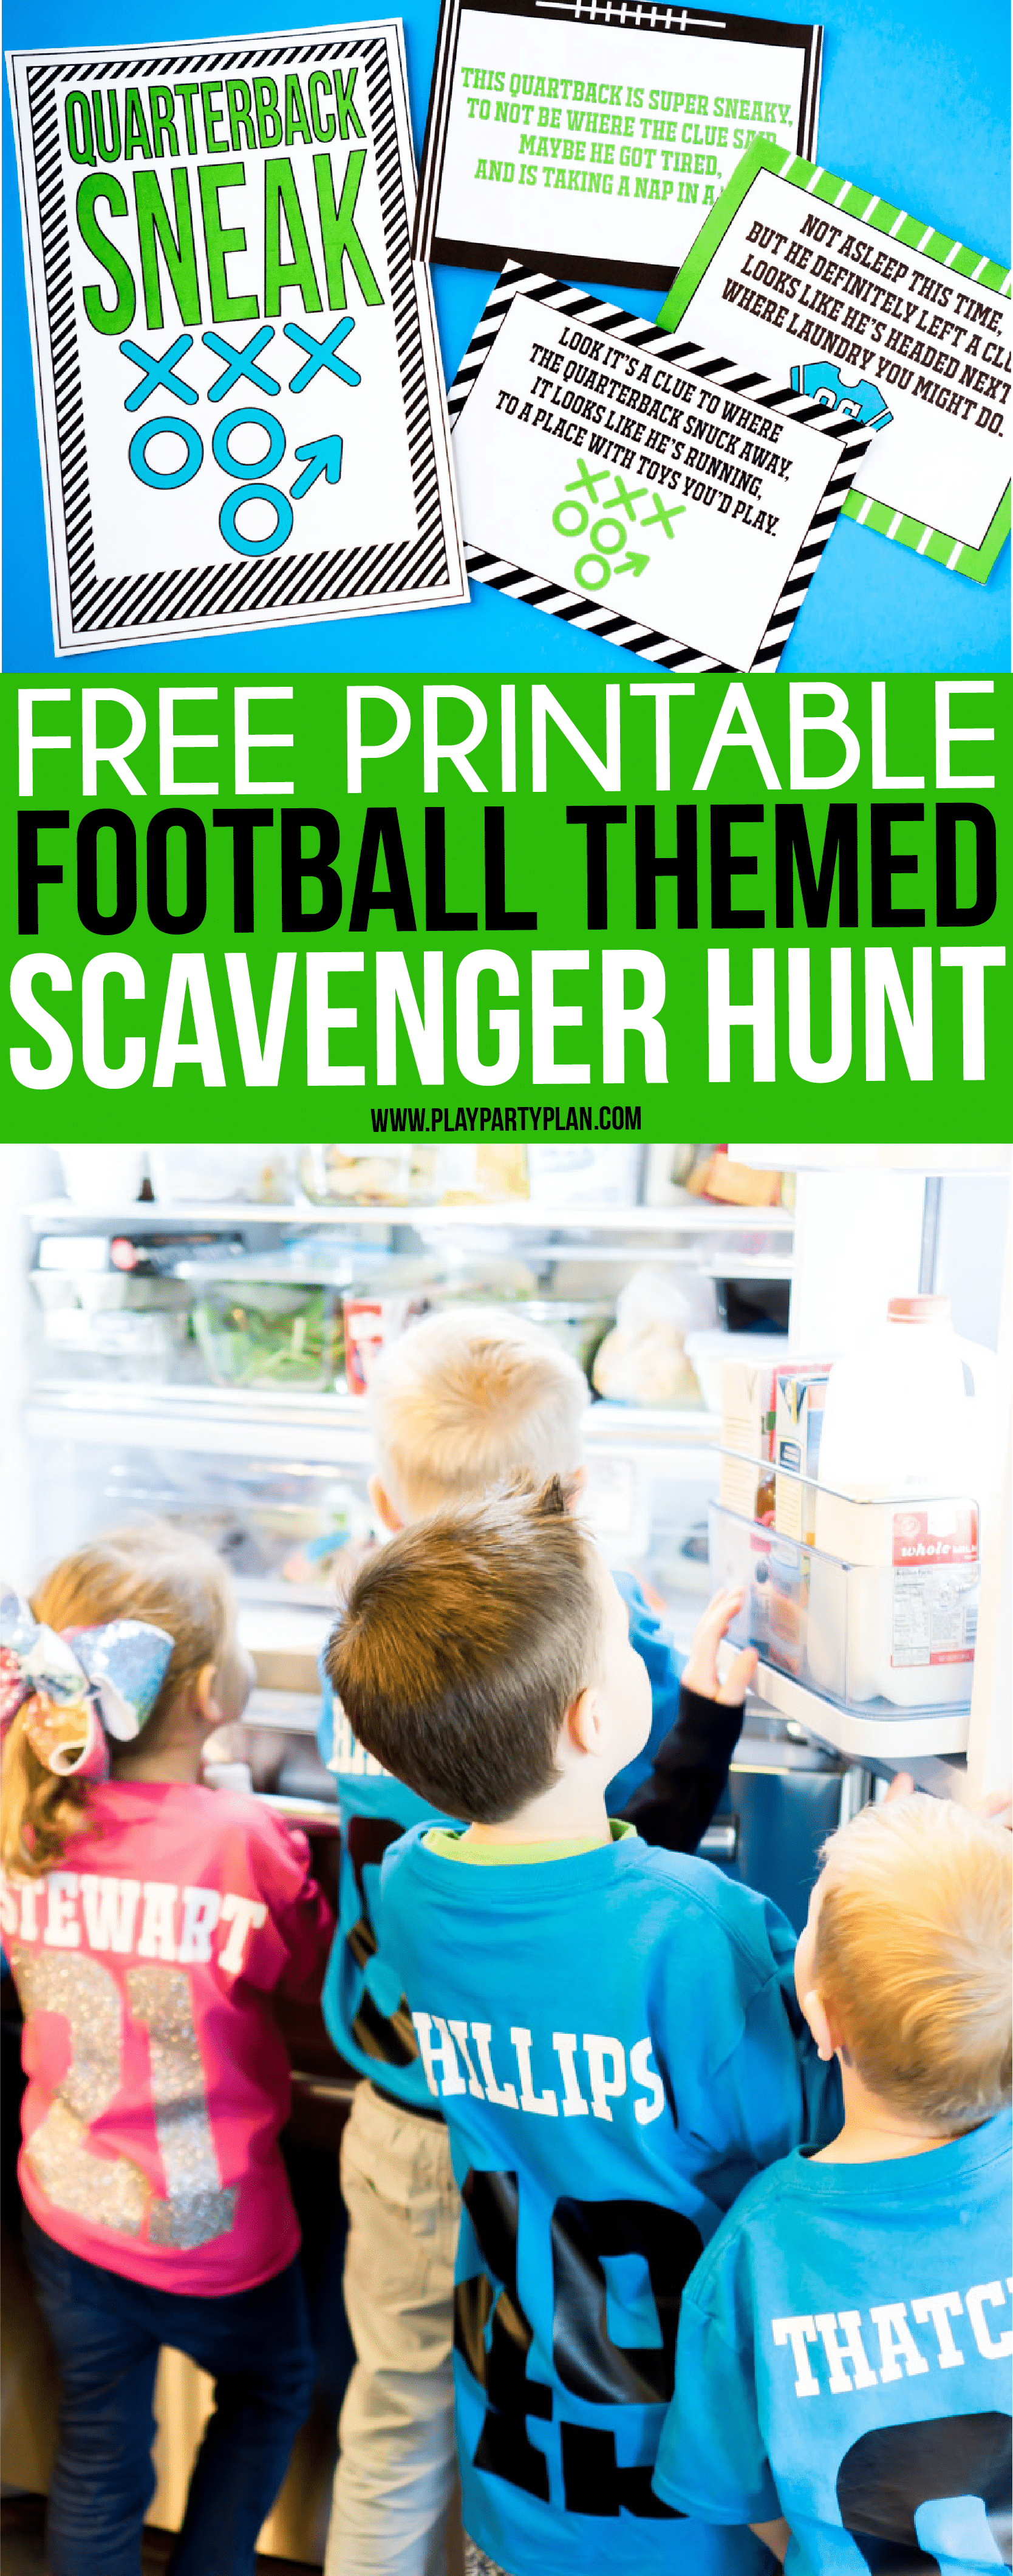 This football themed scavenger hunt would be perfect for a football birthday party or if you’re looking for Super Bowl party ideas for kids! It’s a free printable that’s simple but one of the most fun games for kids out there! All of our kids loved it!!!